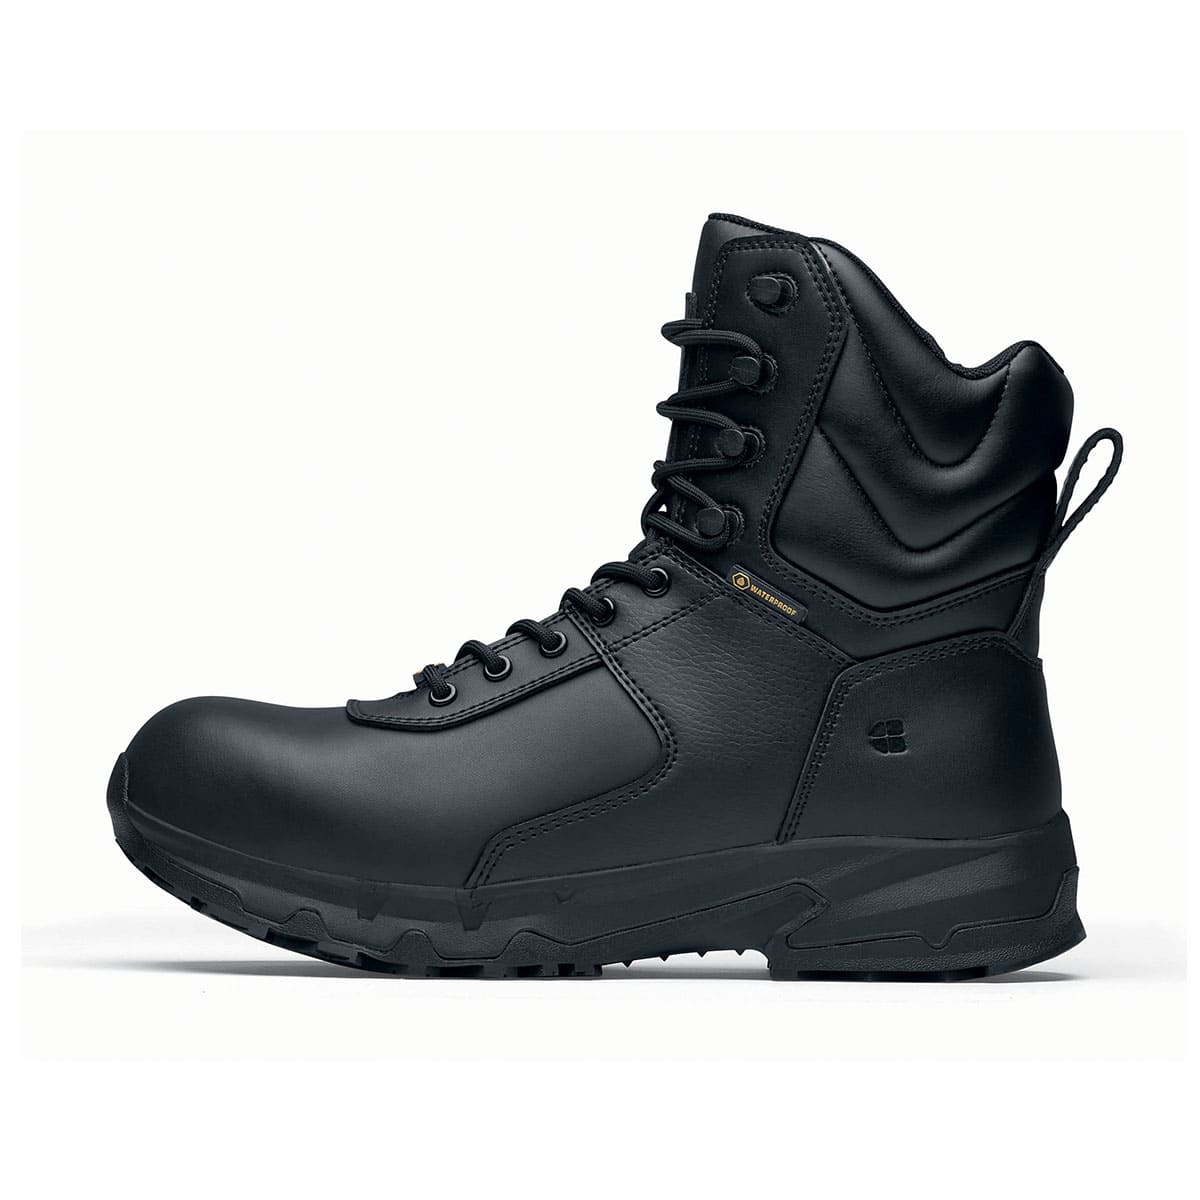 The Guard High from Shoes For Crews are waterproof slip-resistant safety boots with a safety toe cap, seen from the left.